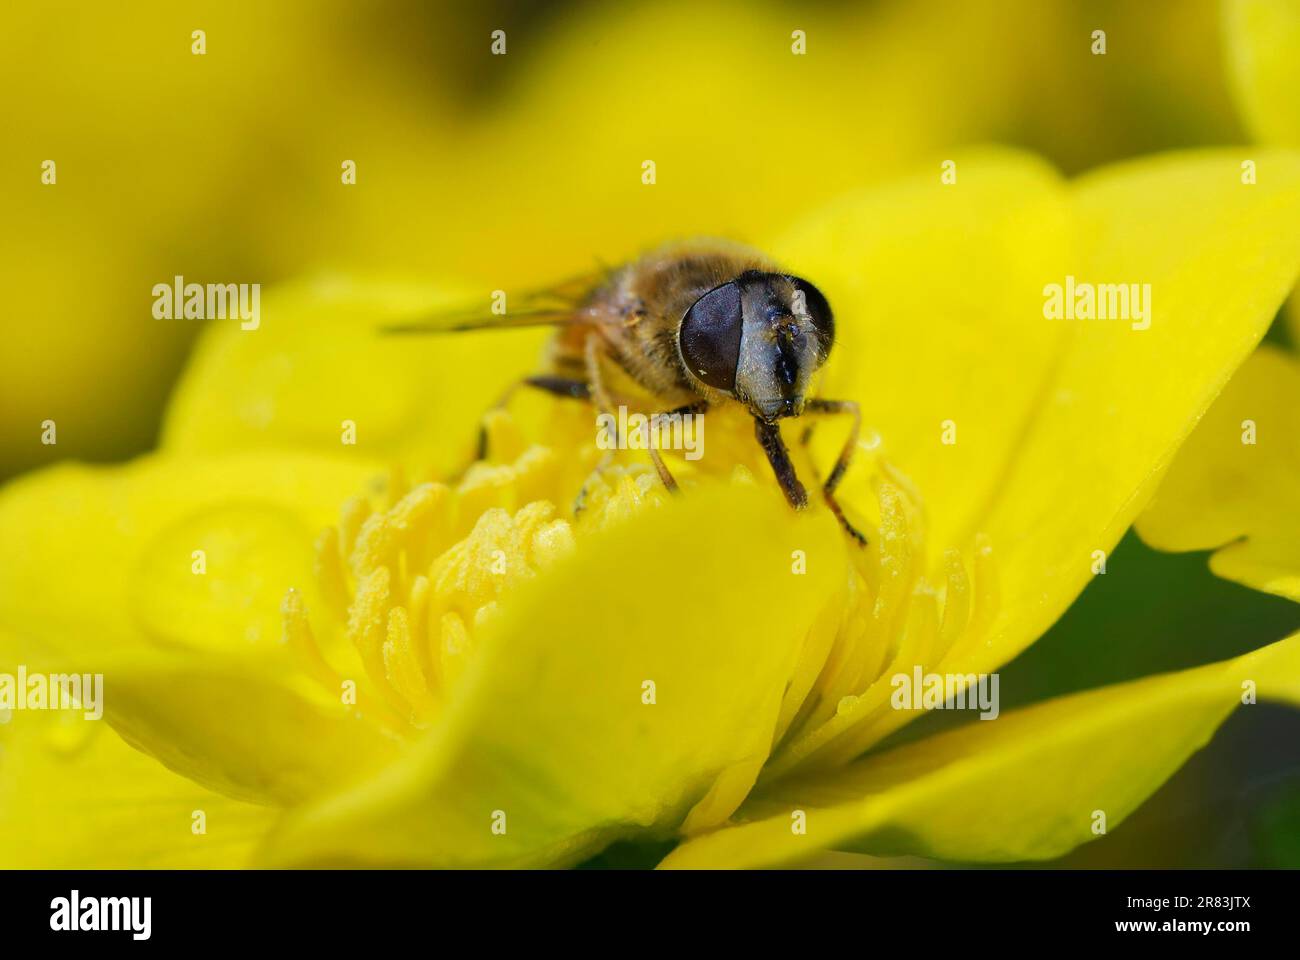 Bee collecting pollen in a marsh marigold blossom Stock Photo